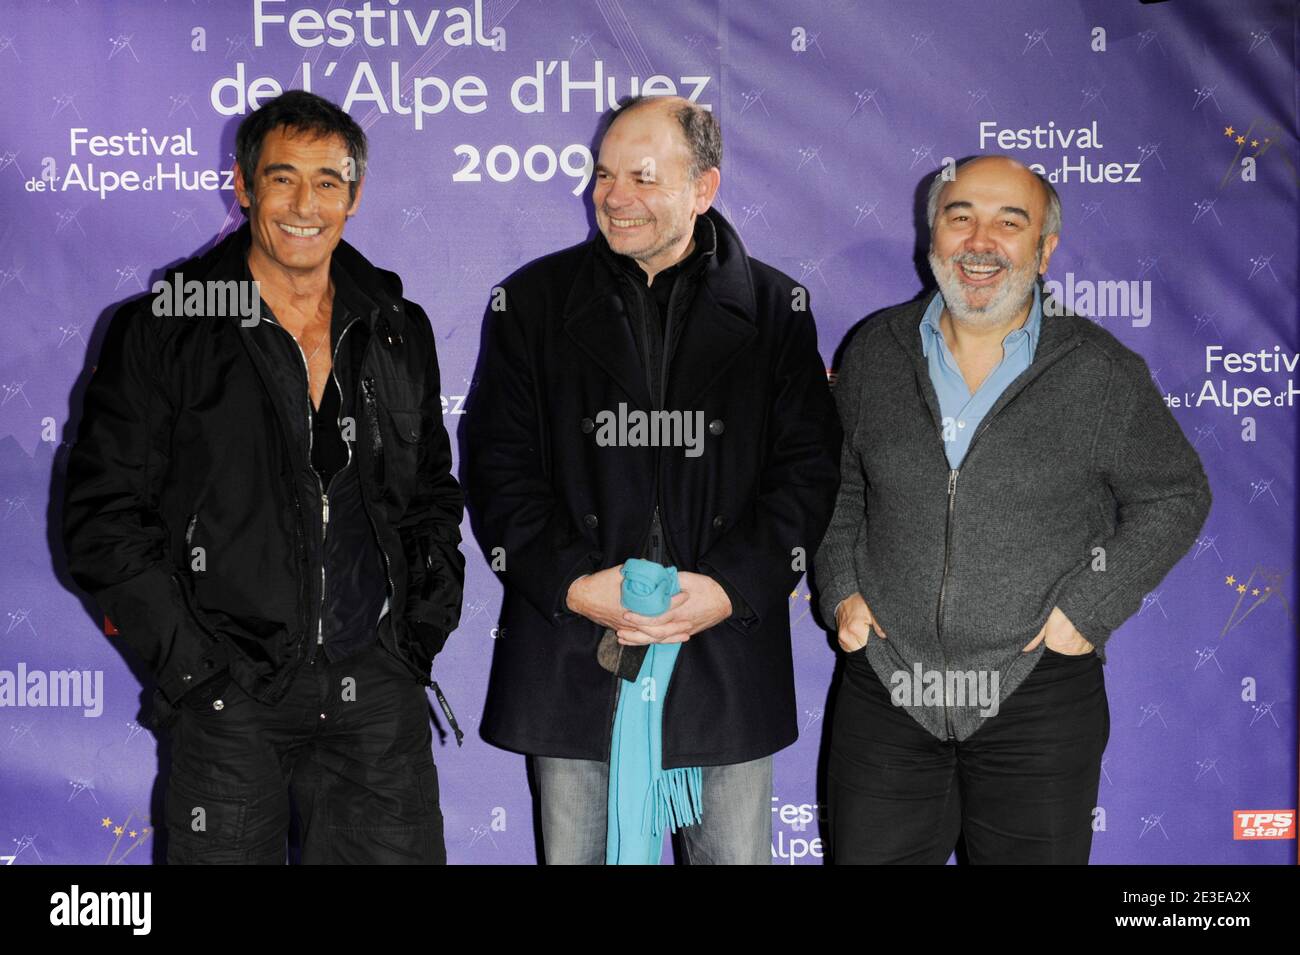 Gerard Lanvin, Jean-Pierre Darroussin and Gerard Jugnot pose during the 12th 'Alpe d'Huez comedy Film Festival' held at l'Alpe d'Huez, France, on January 22, 2009. Photo by Guignebourg-Taamallah/ABACAPRESS.COM Stock Photo